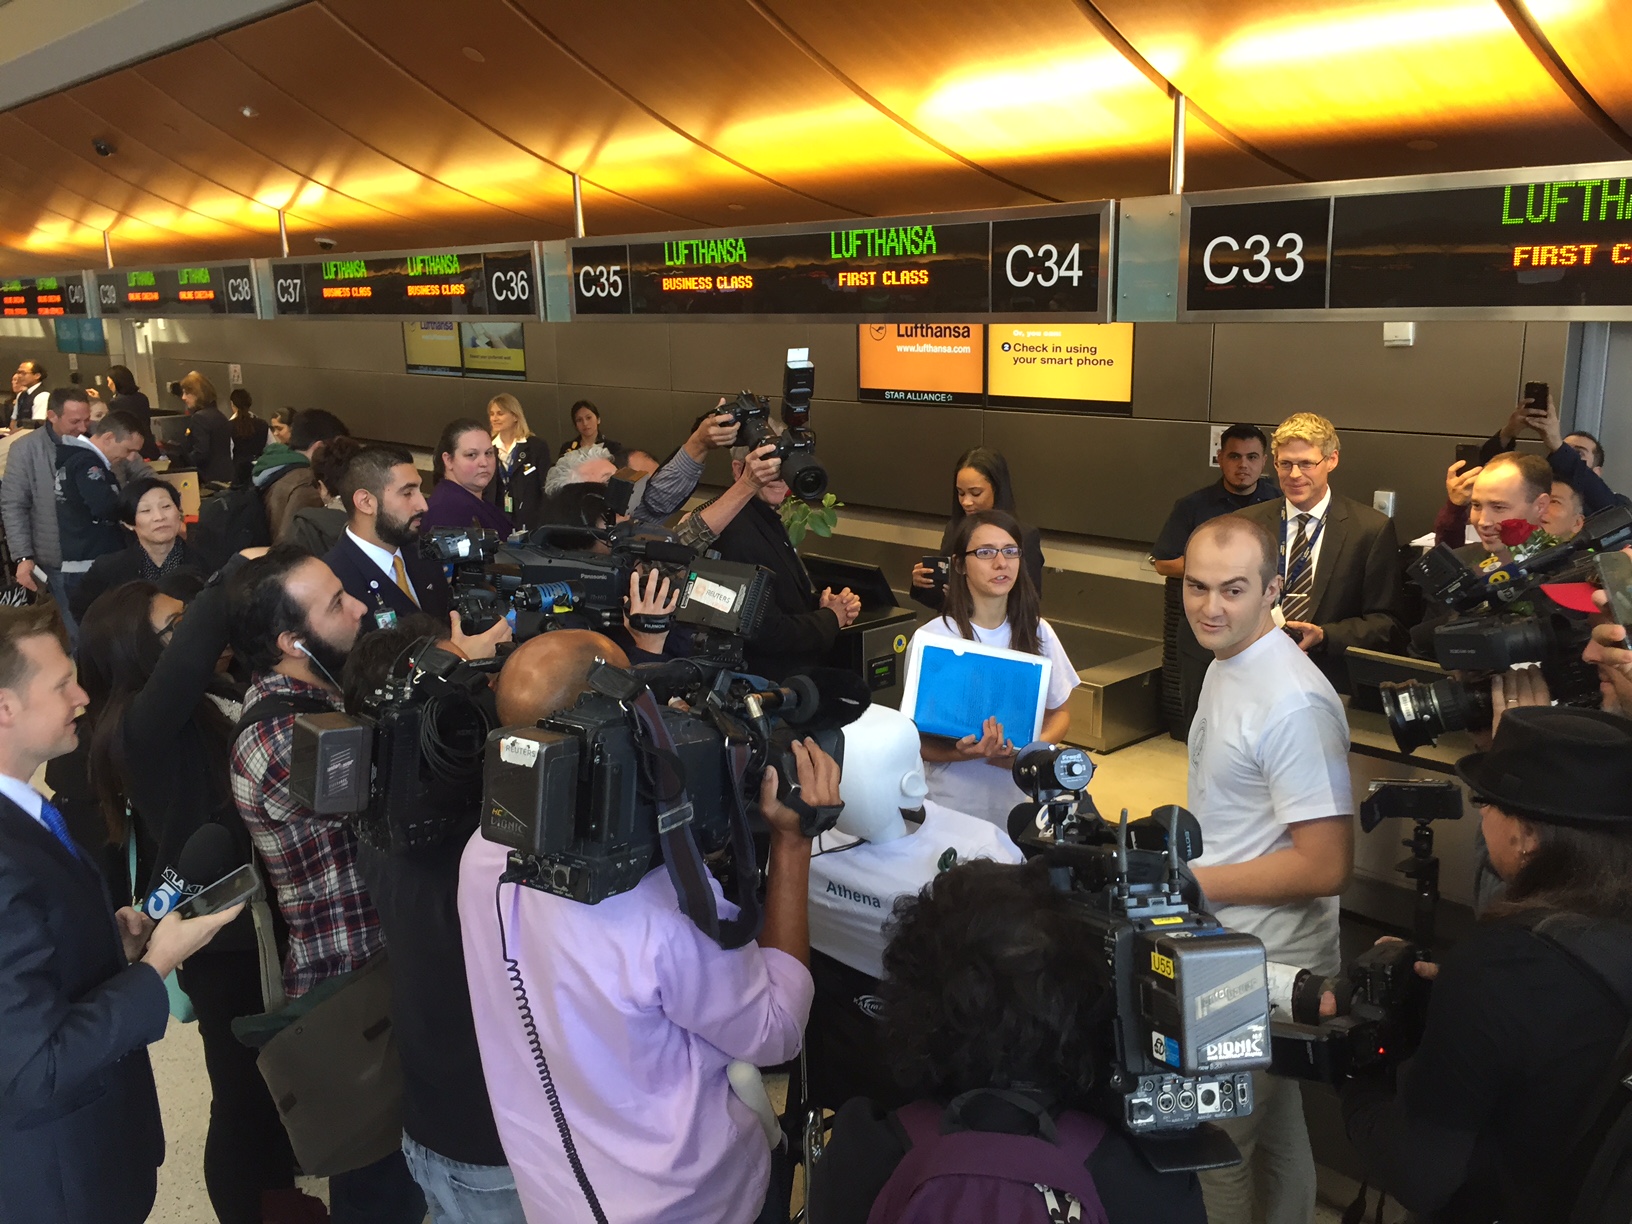 The robot's arrival at LAX created a media circus.